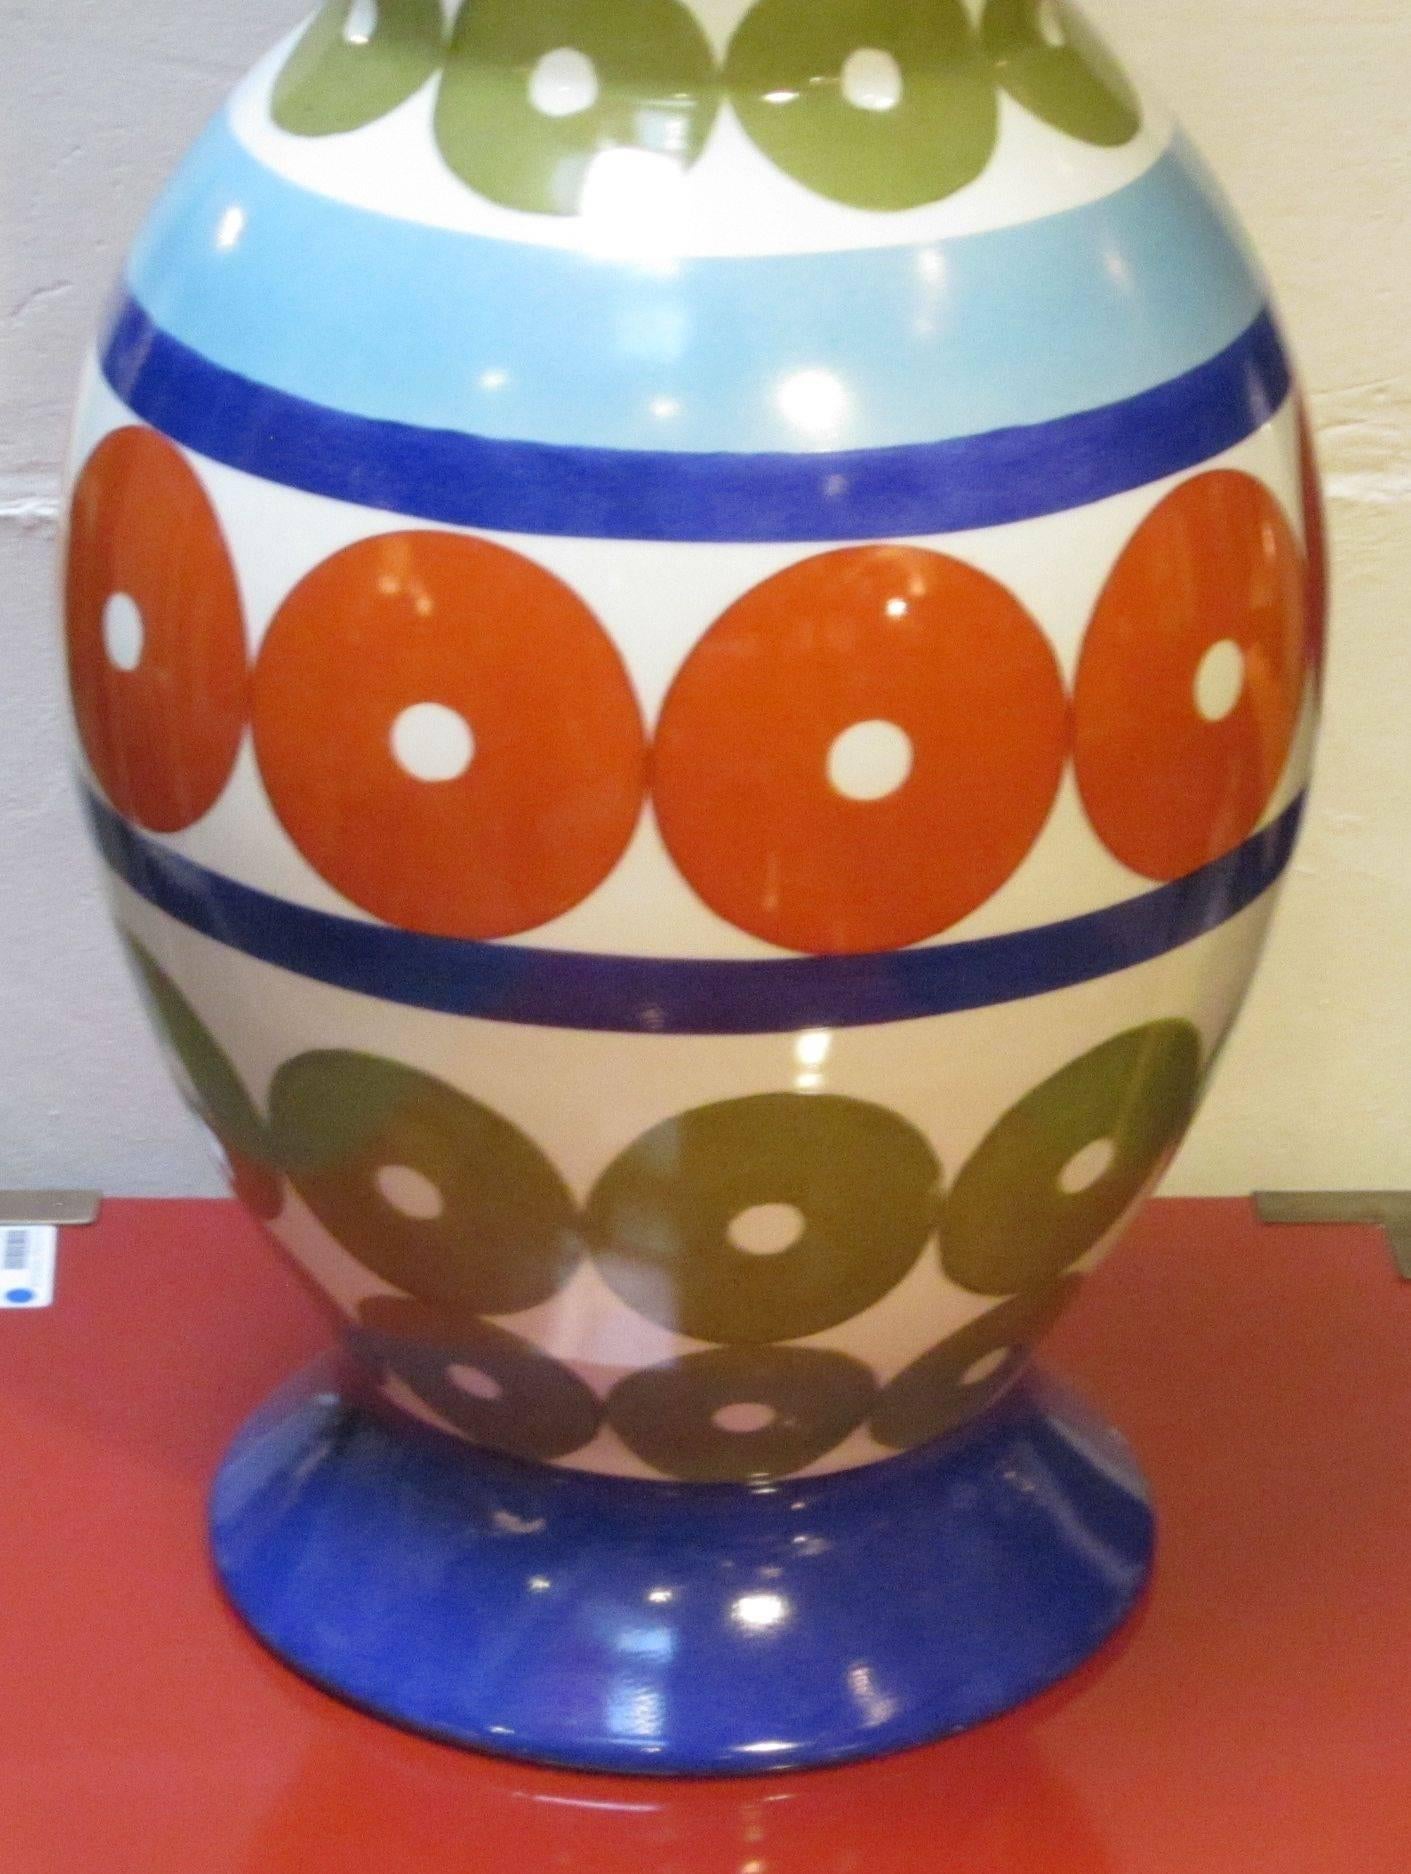 Chinese Bright Patterned Blue, White, Olive and Red Porcelain Vase by Frederic De Luca